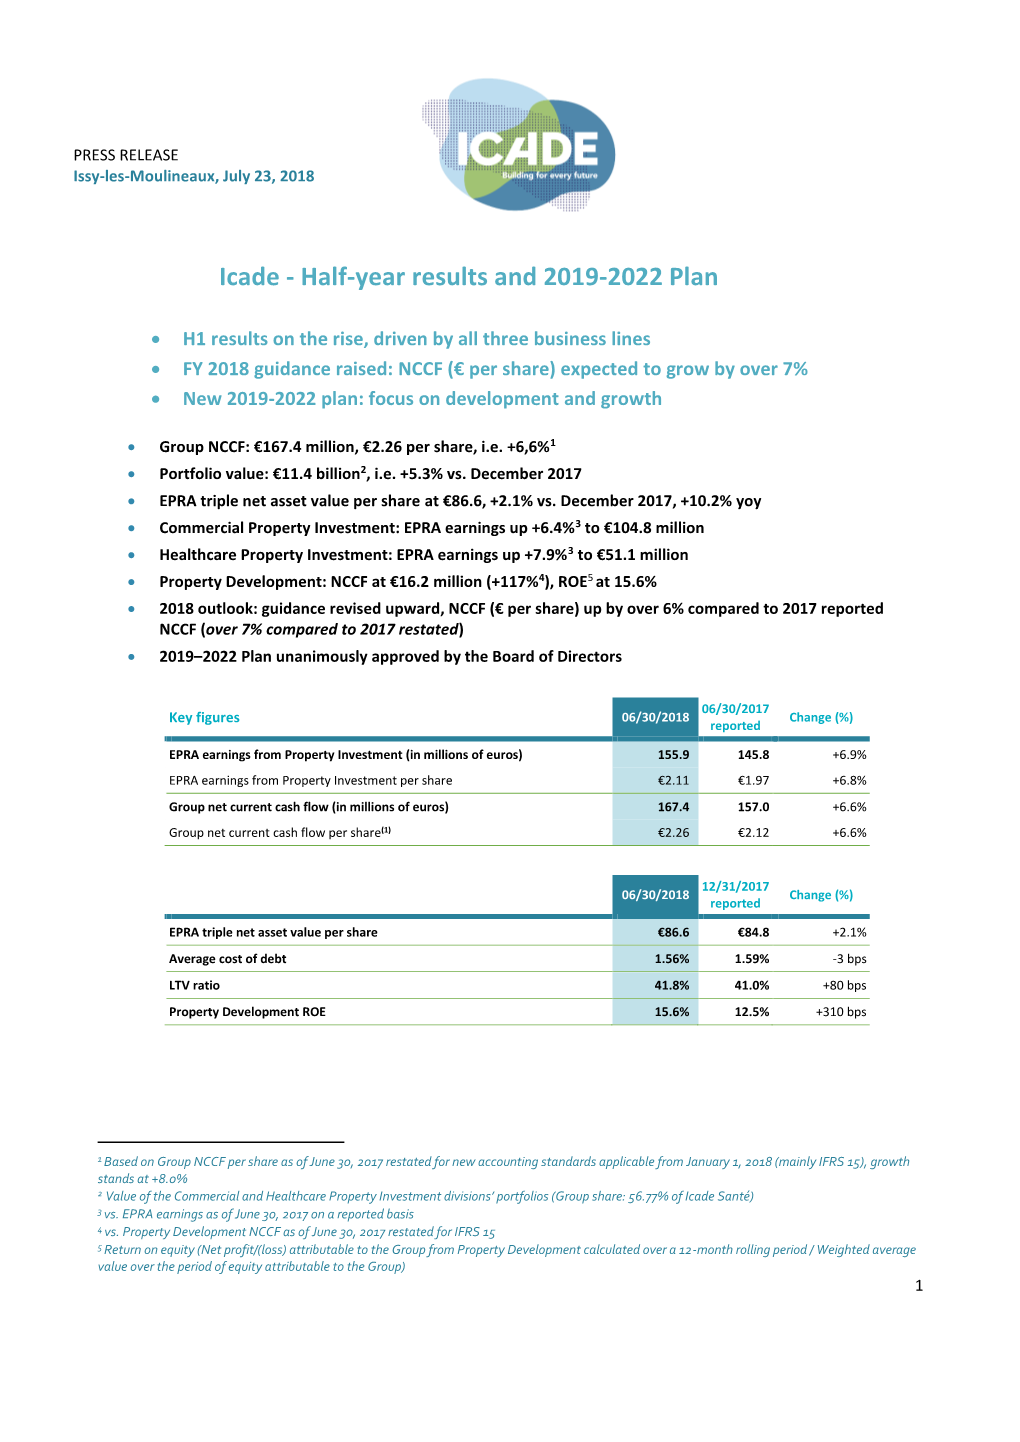 Half-Year Results and 2019-2022 Plan